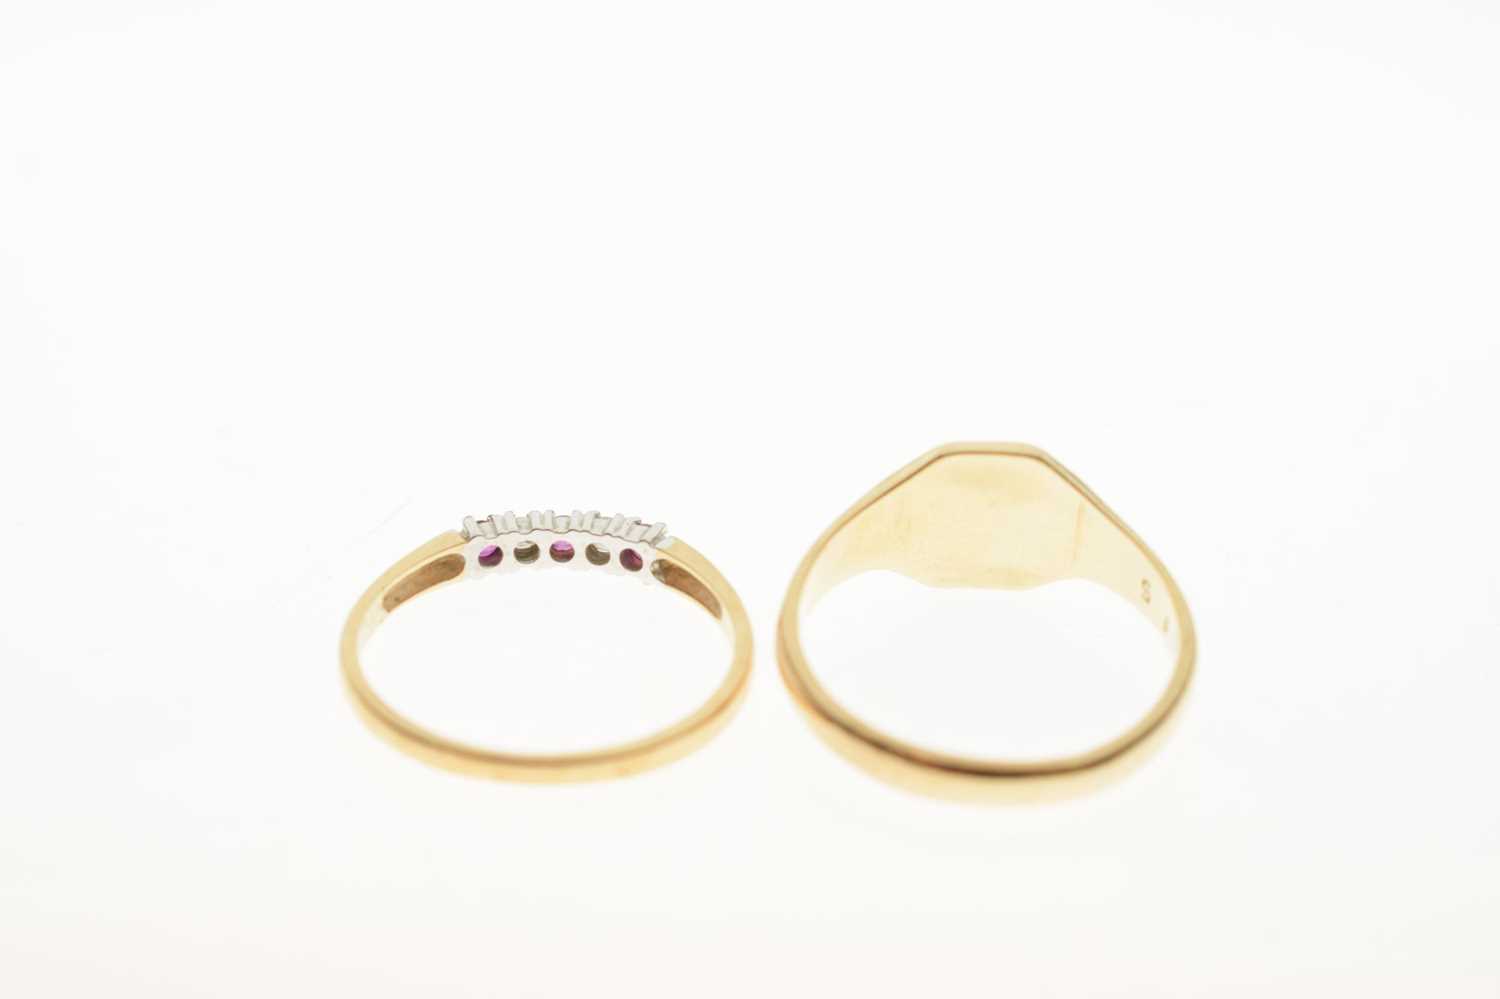 9ct gold ruby and diamond five-stone half eternity ring, and a 9ct gold signet ring - Image 3 of 6